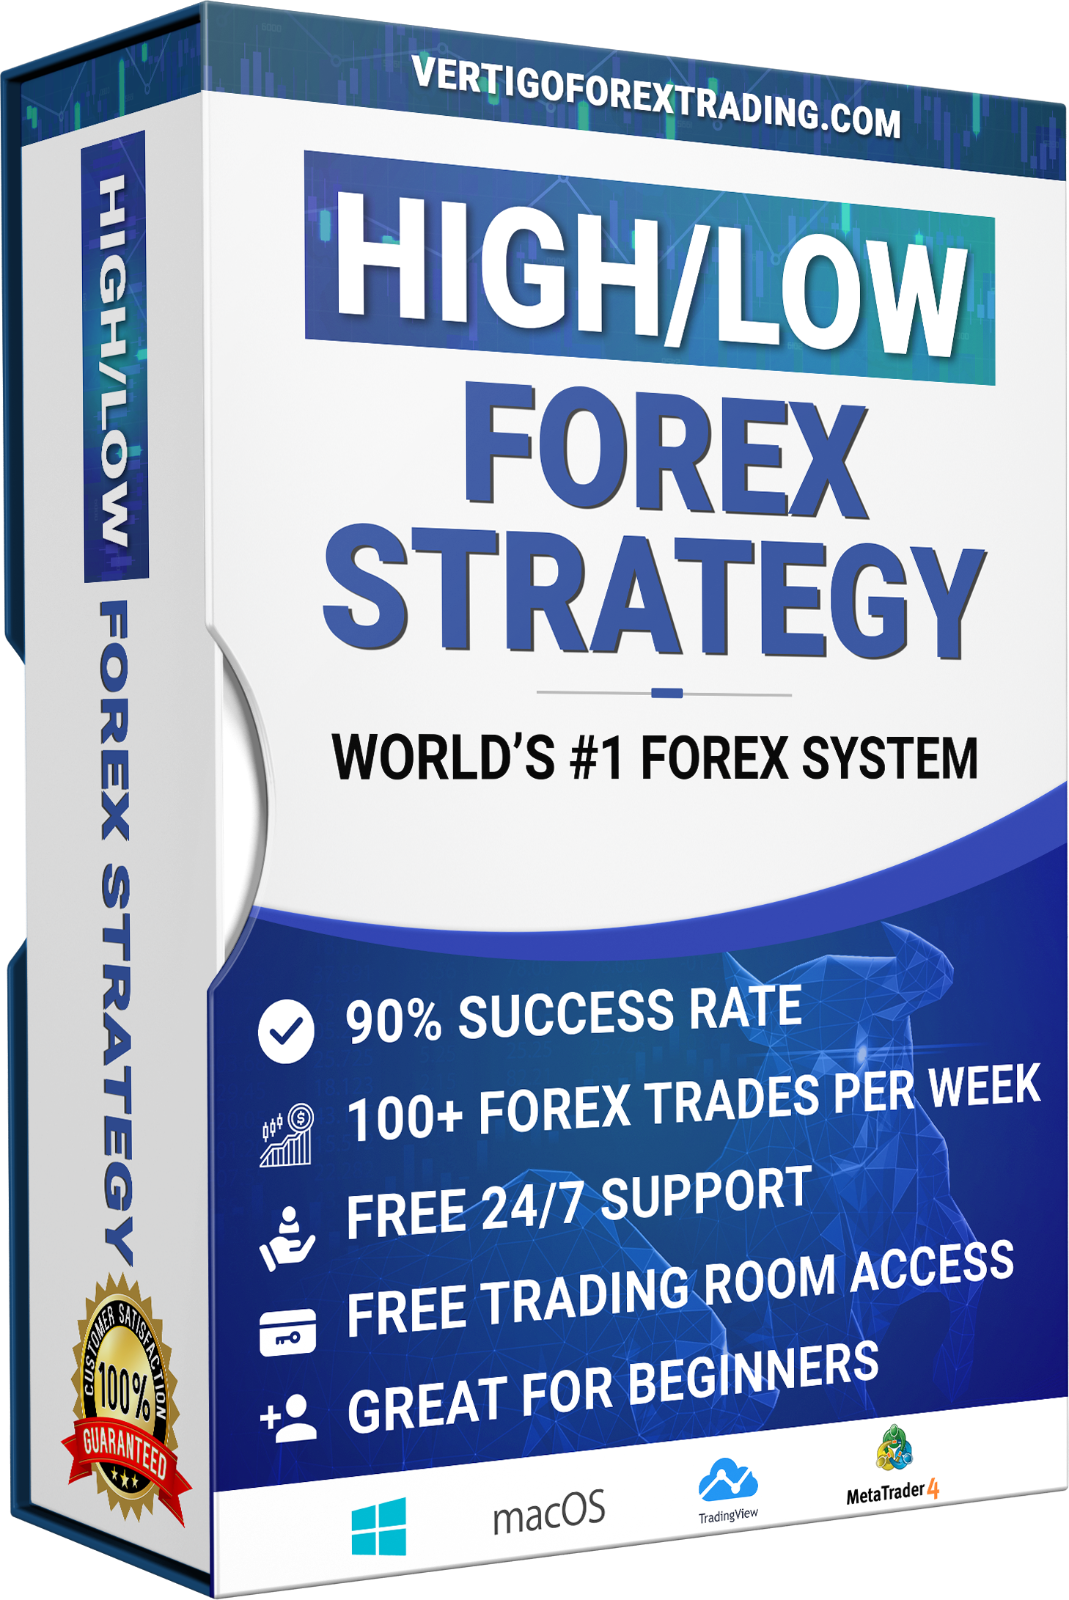 Forex: Amazing High/low Forex Trading System **free Gift+ $50 Discount Today**